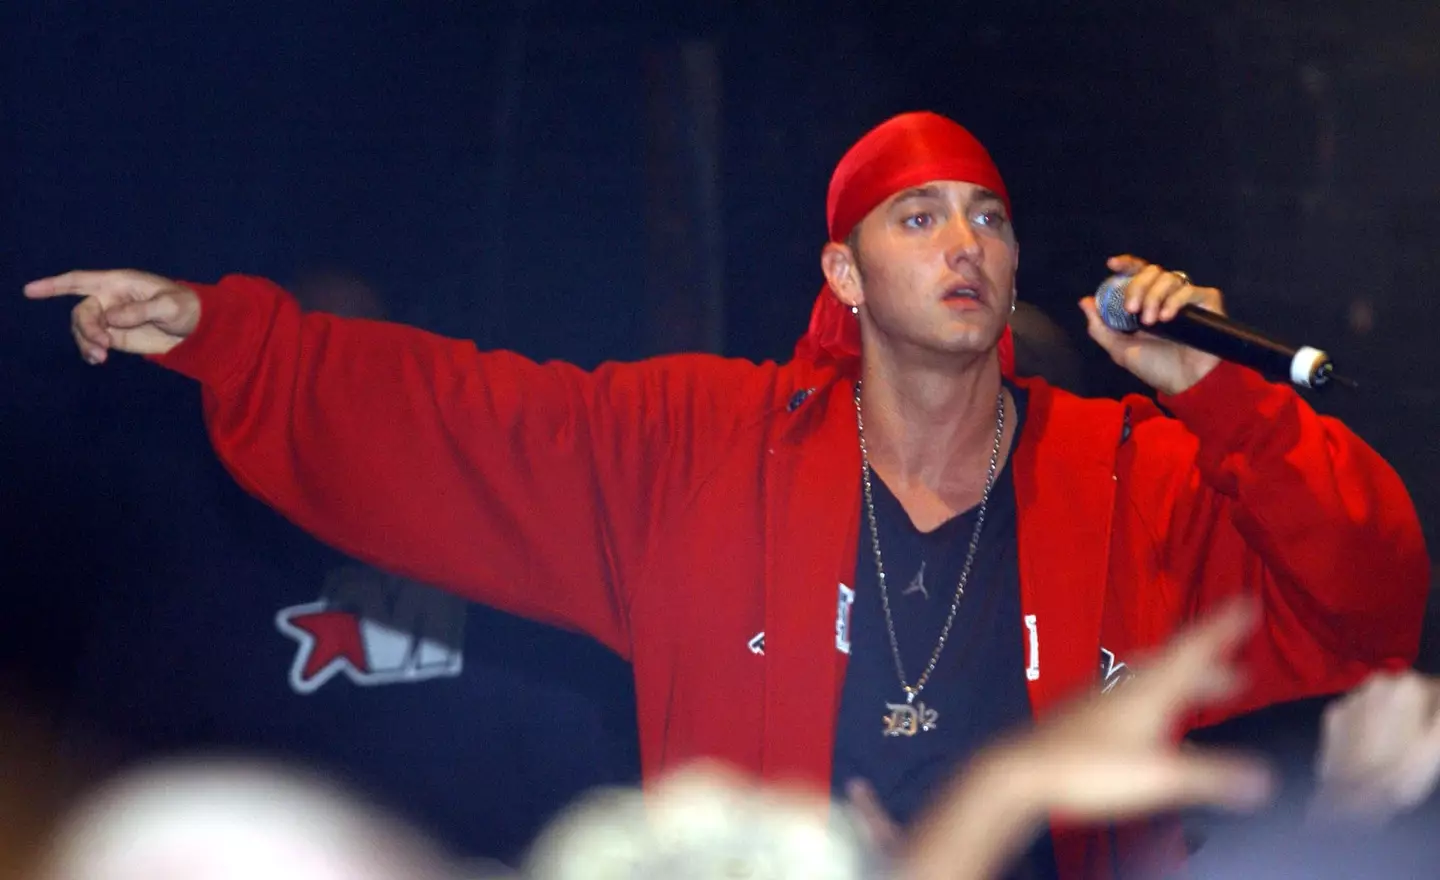 Eminem ended up losing at the Rap Olympics.